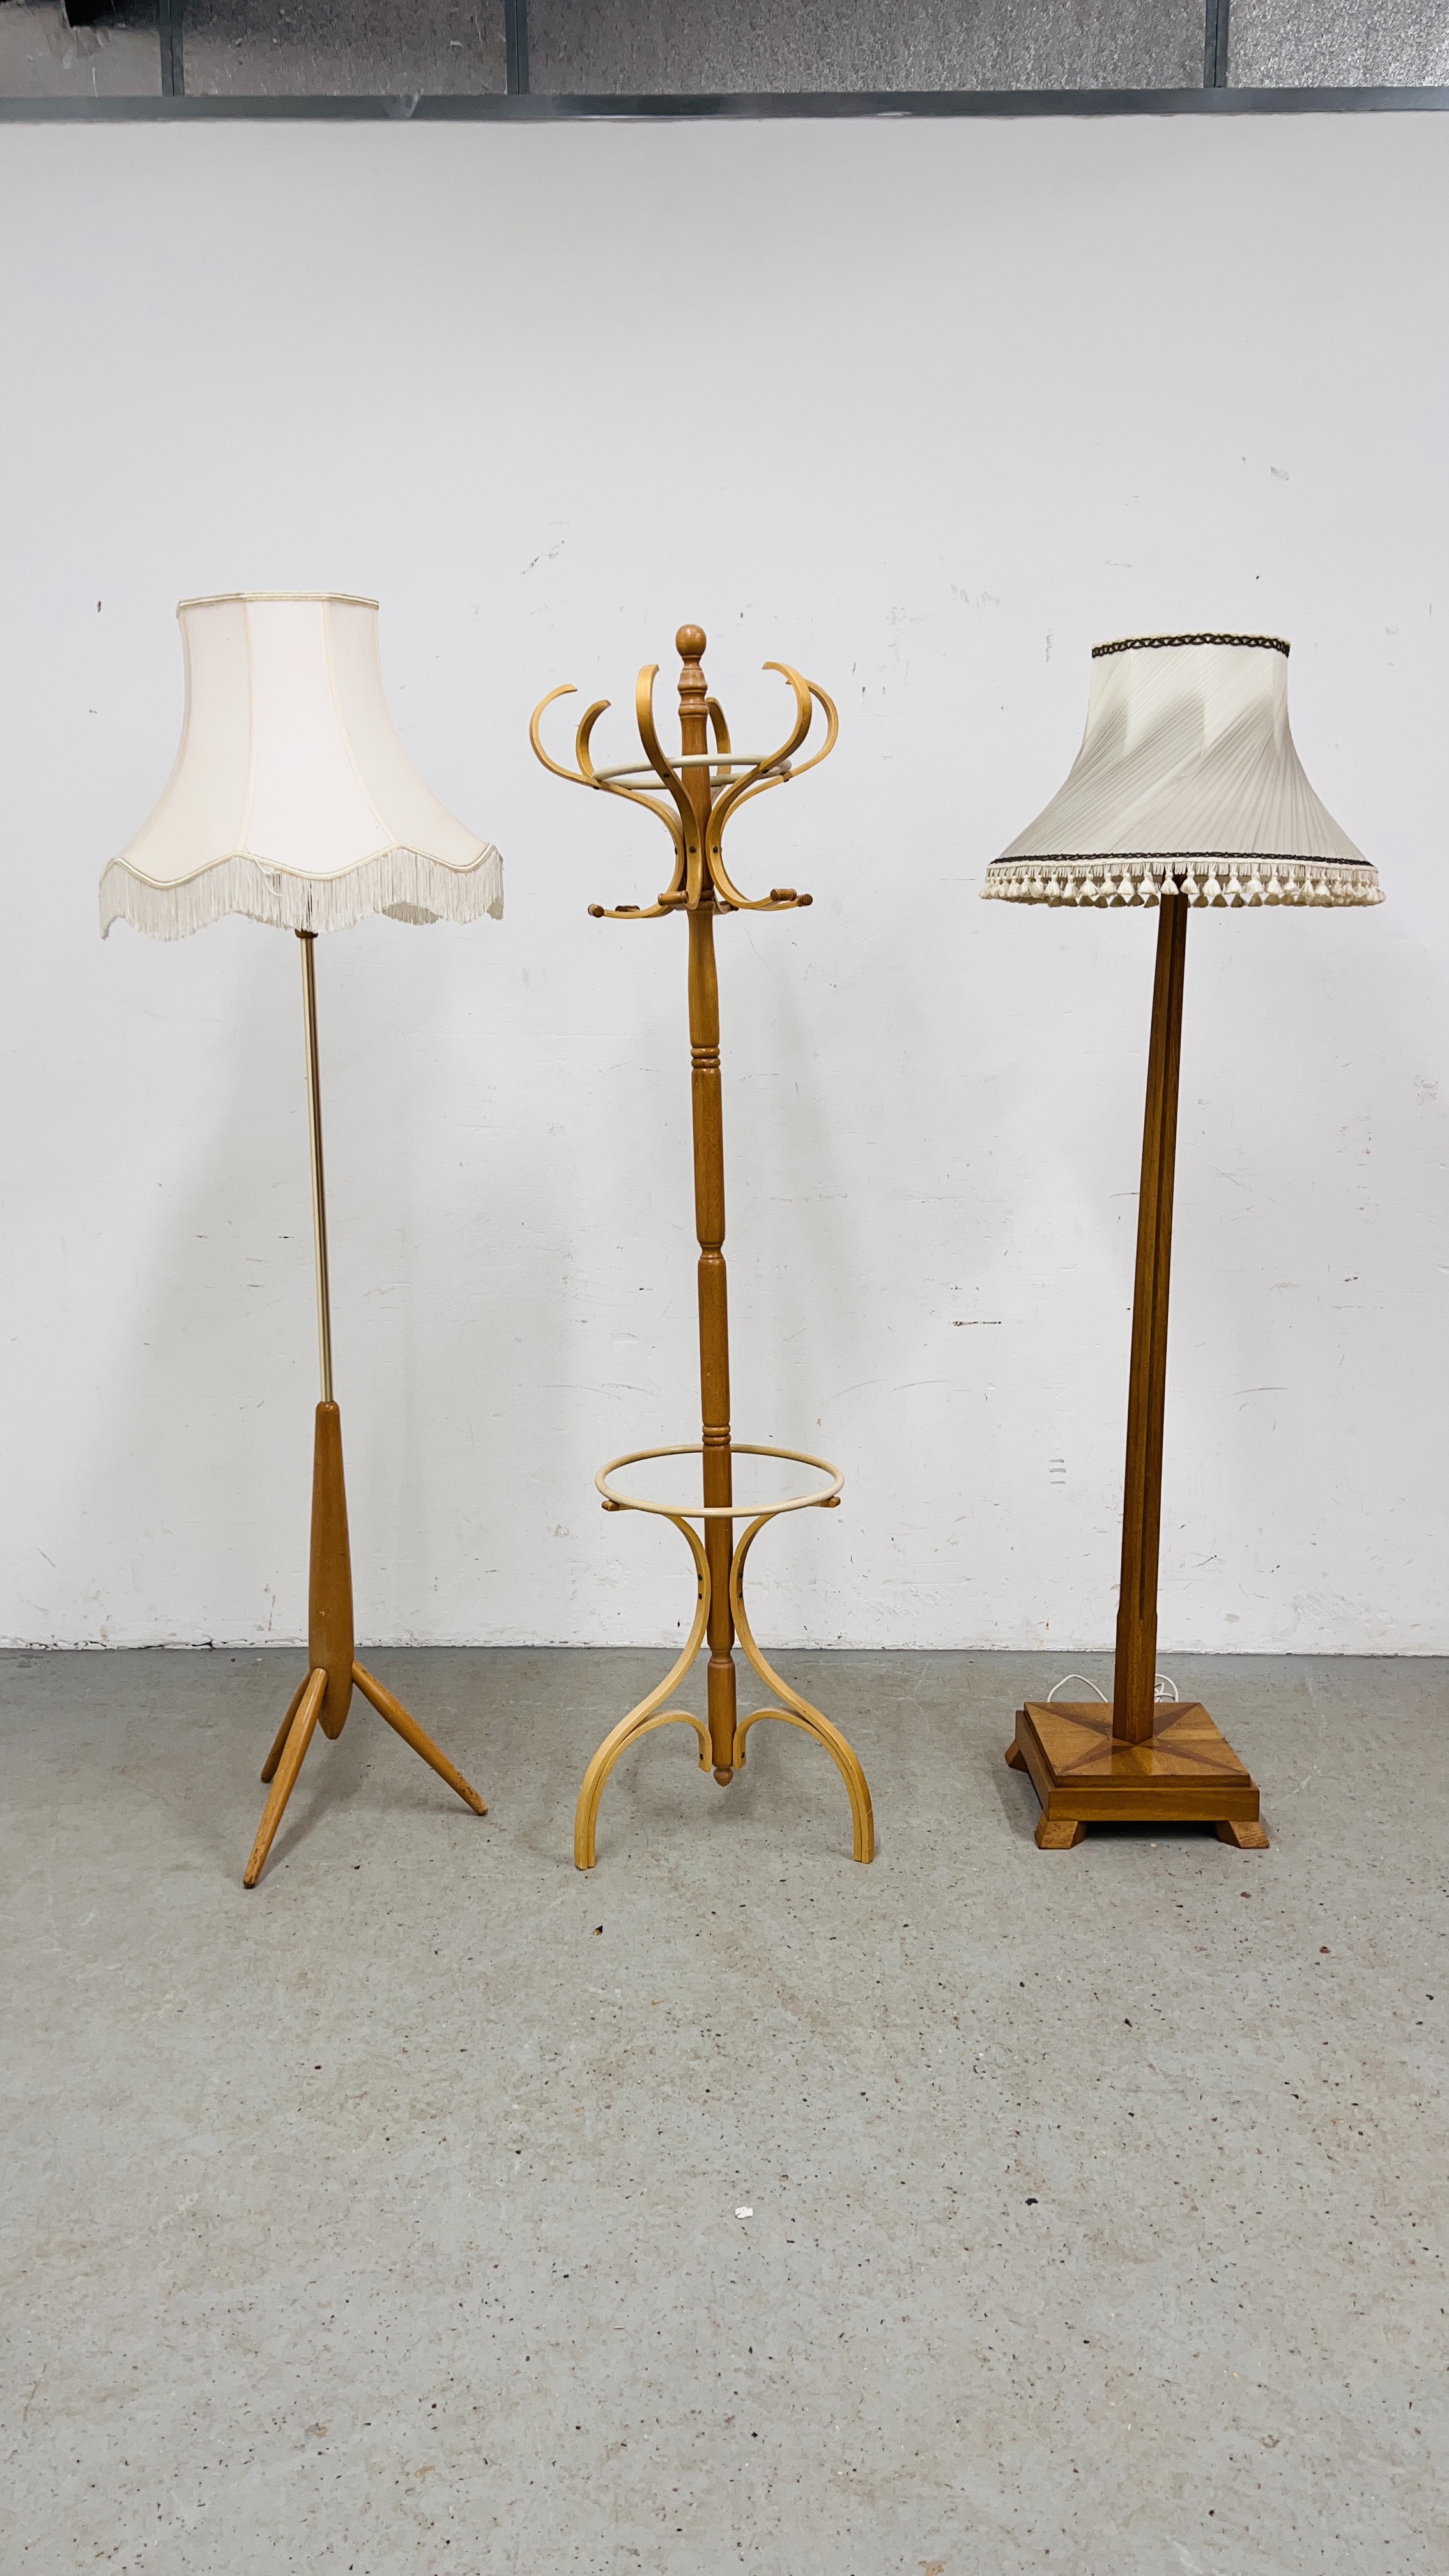 A RETRO BEECH WOOD TRIPOD FOOTED STANDARD LAMP WITH SHADE - WIRE REMOVED - DECO STYLE STANDARD LAMP